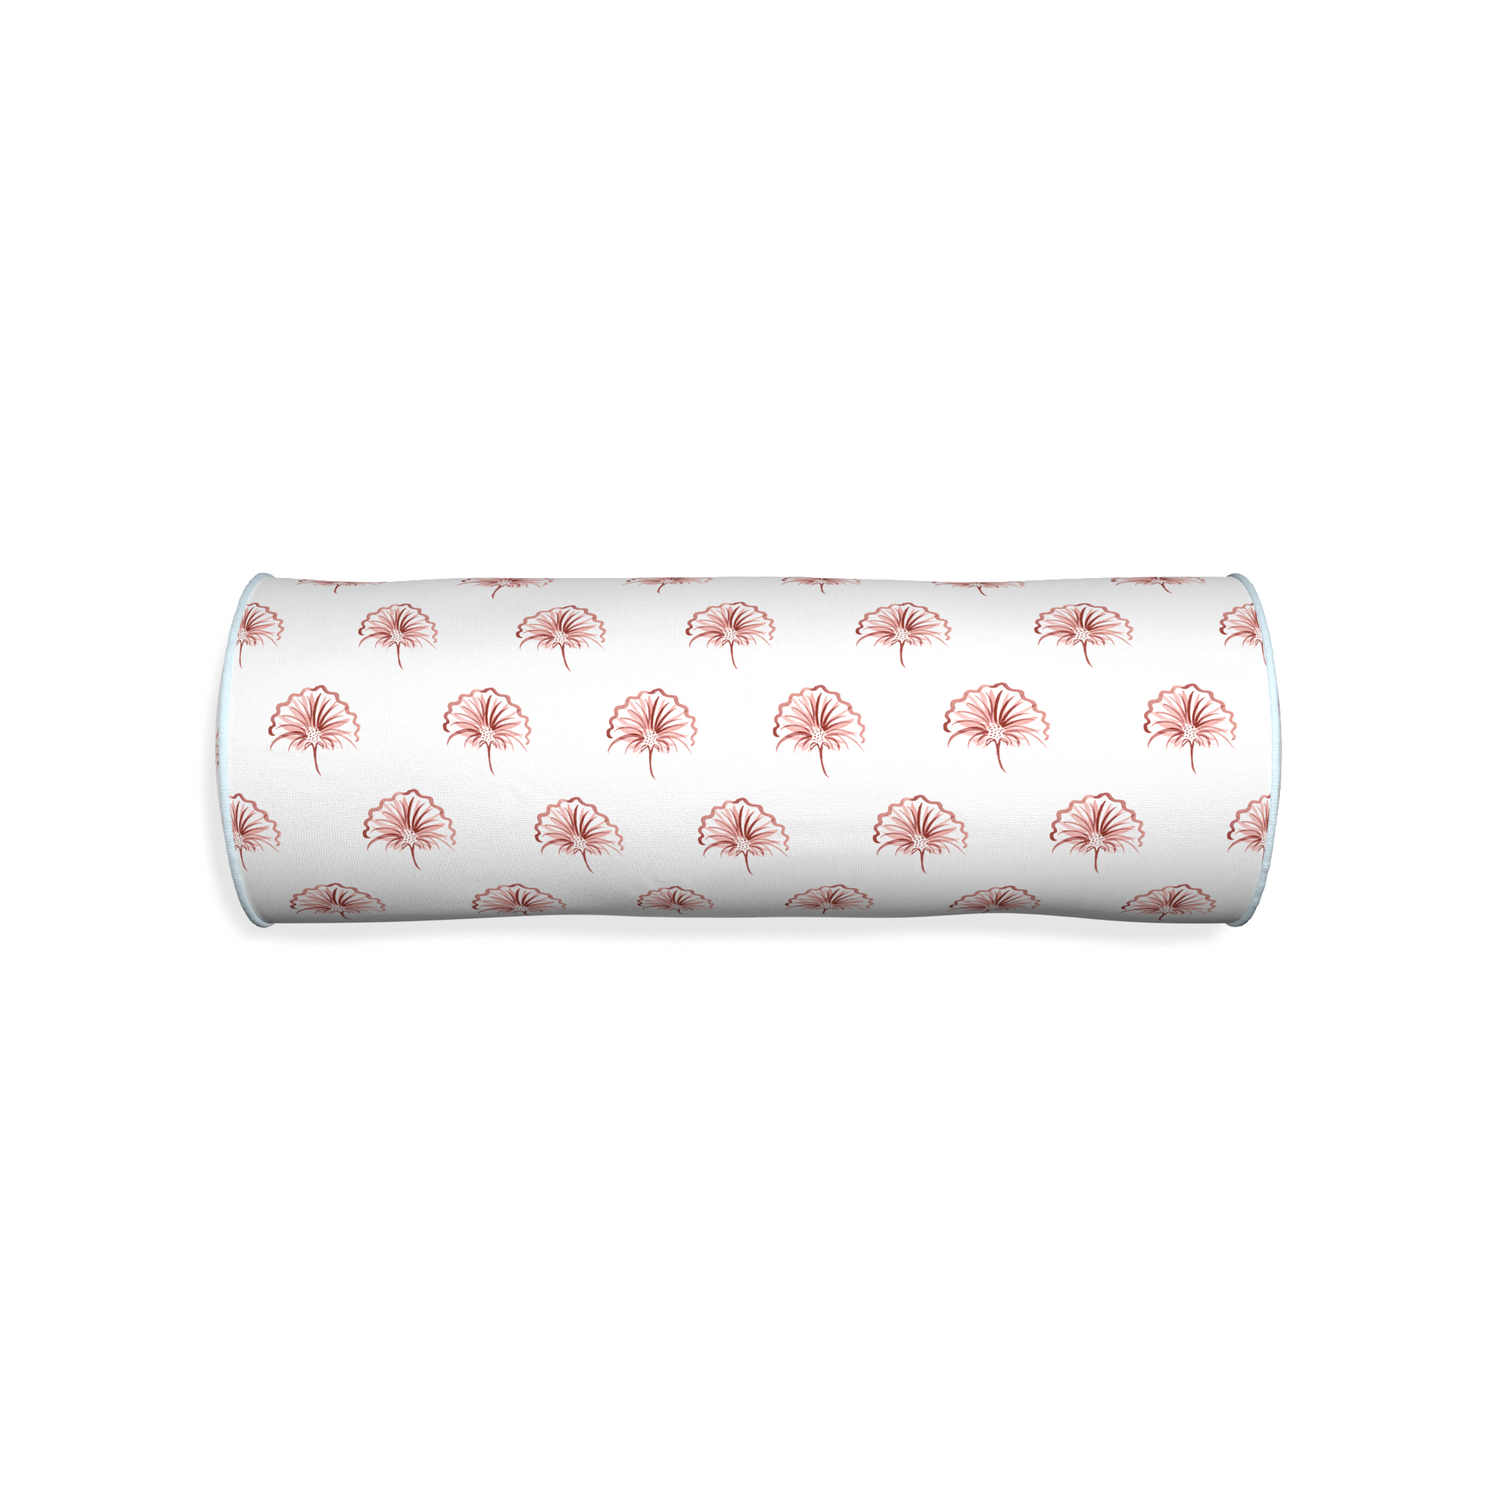 Bolster penelope rose custom pillow with powder piping on white background